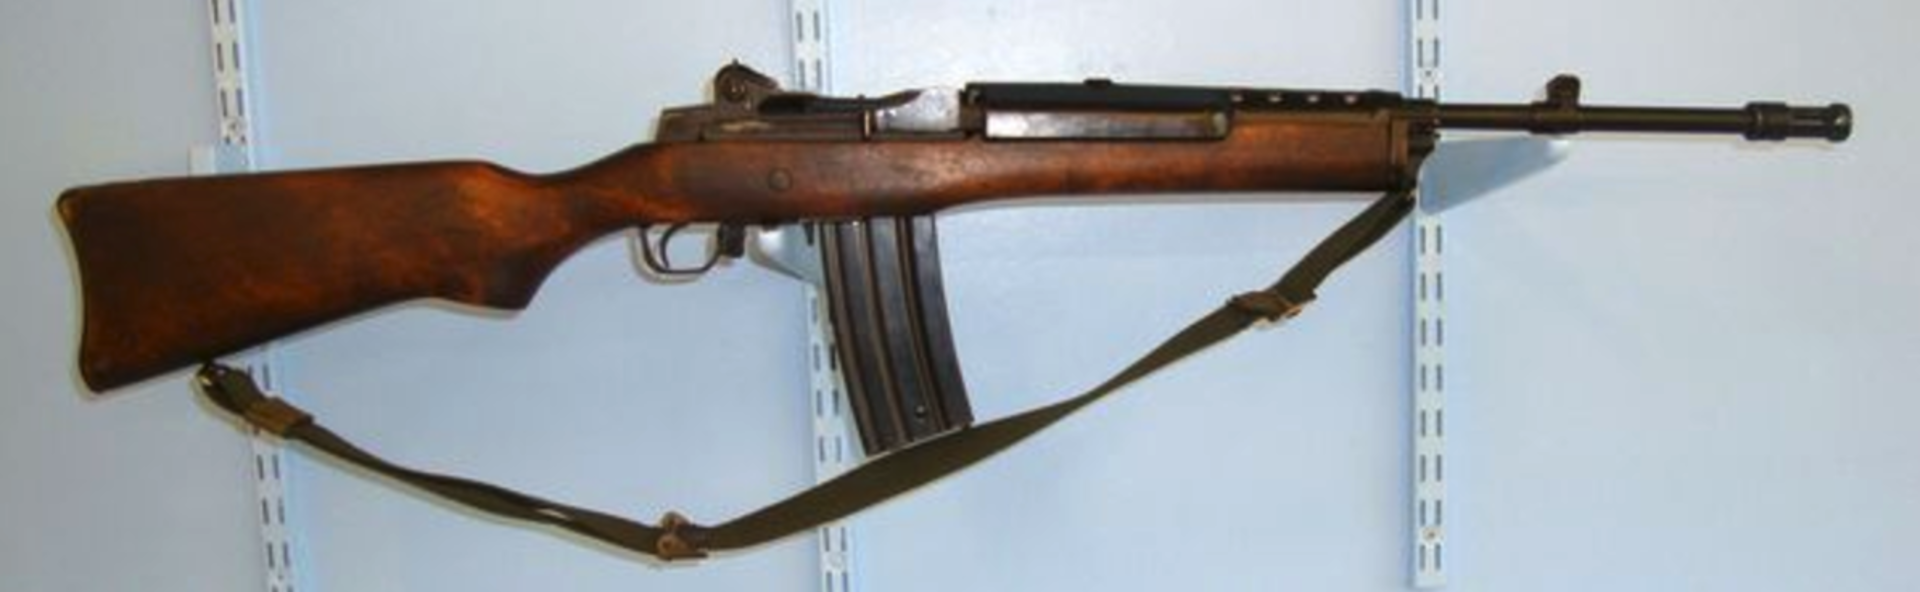 1973 To Present, USA Sturm Ruger Mini-14 .223 Calibre Semi Automatic Carbine With Sling